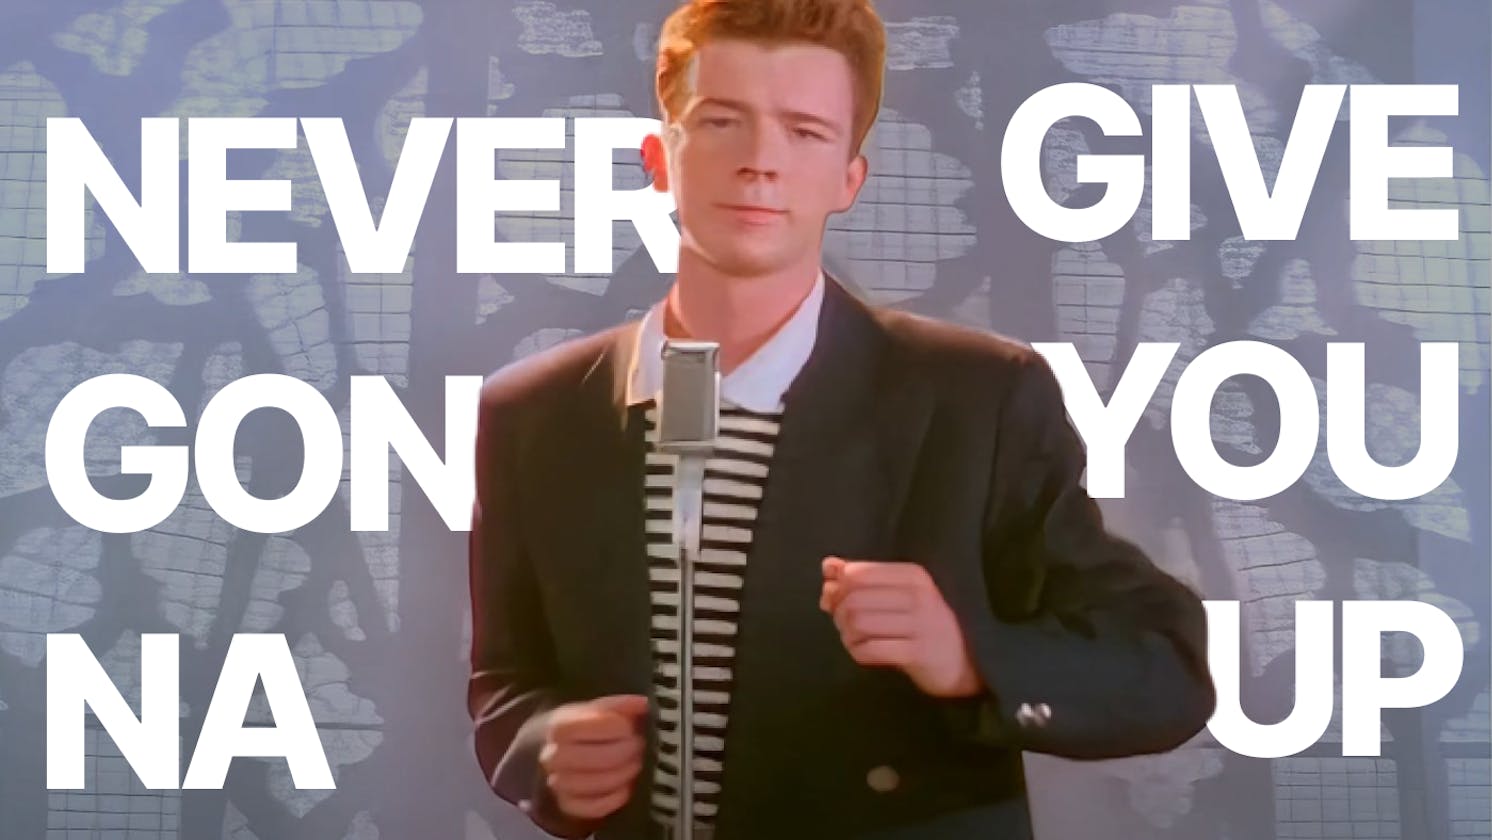 I made a website to rickroll my friends